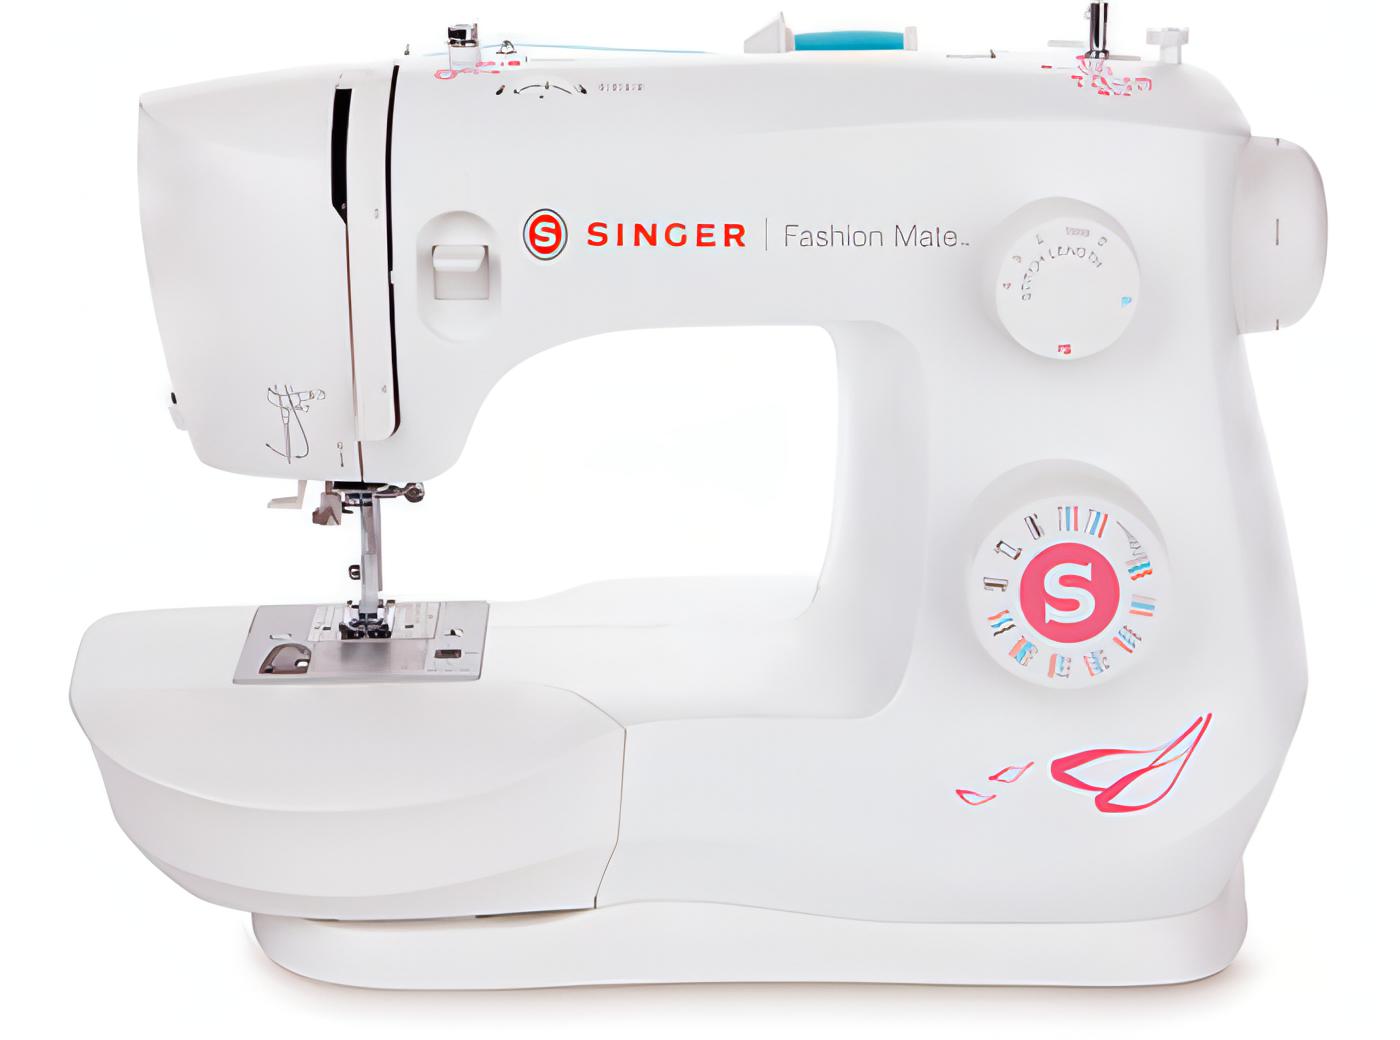 Singer Fashion Mate 3333 Sewing Machine with Drop-in Bobbin - Good as New